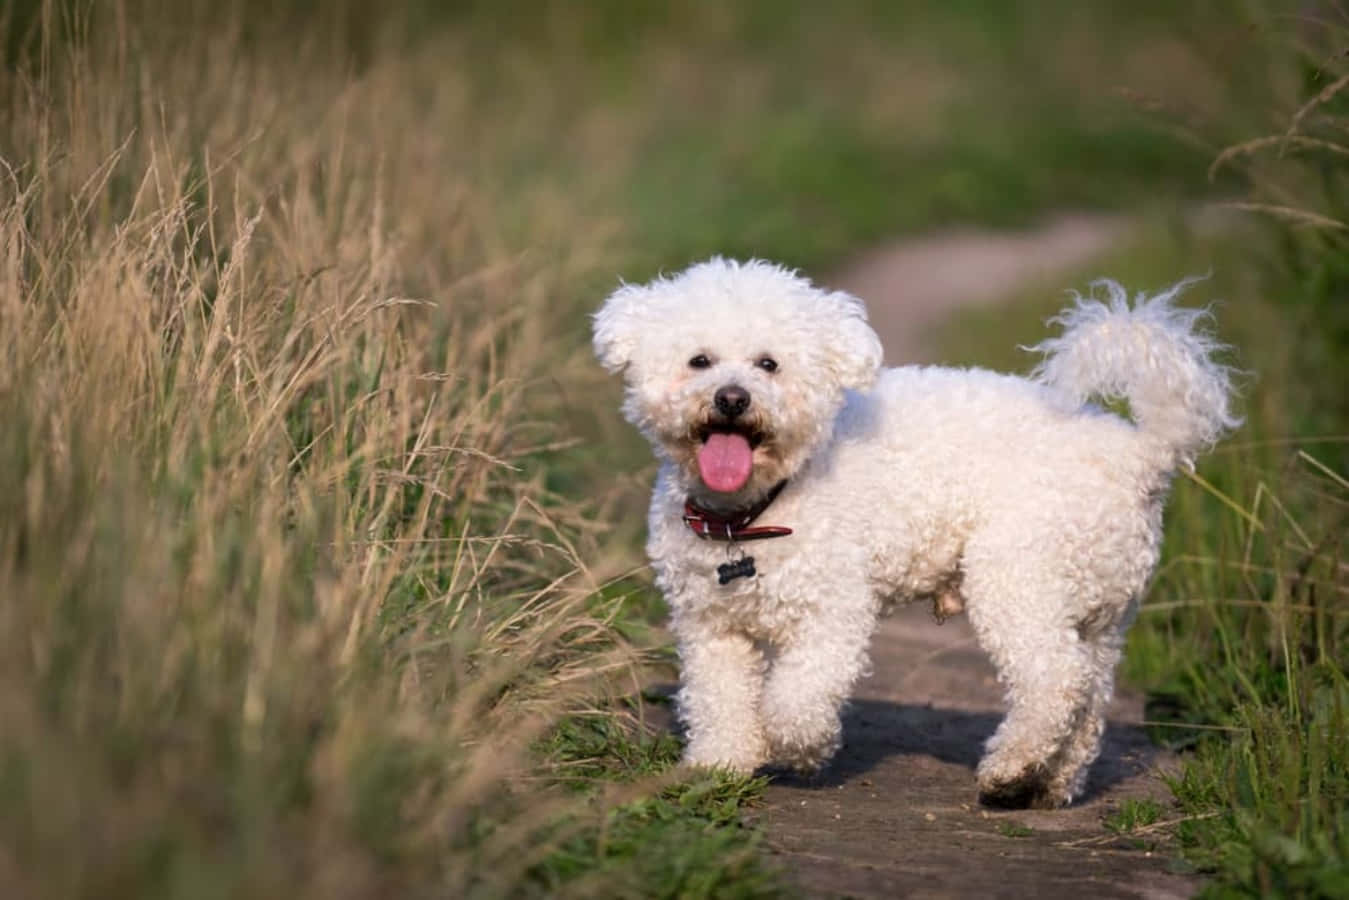 "That Moment When You Realize How Cute a Bichon Frise Is"